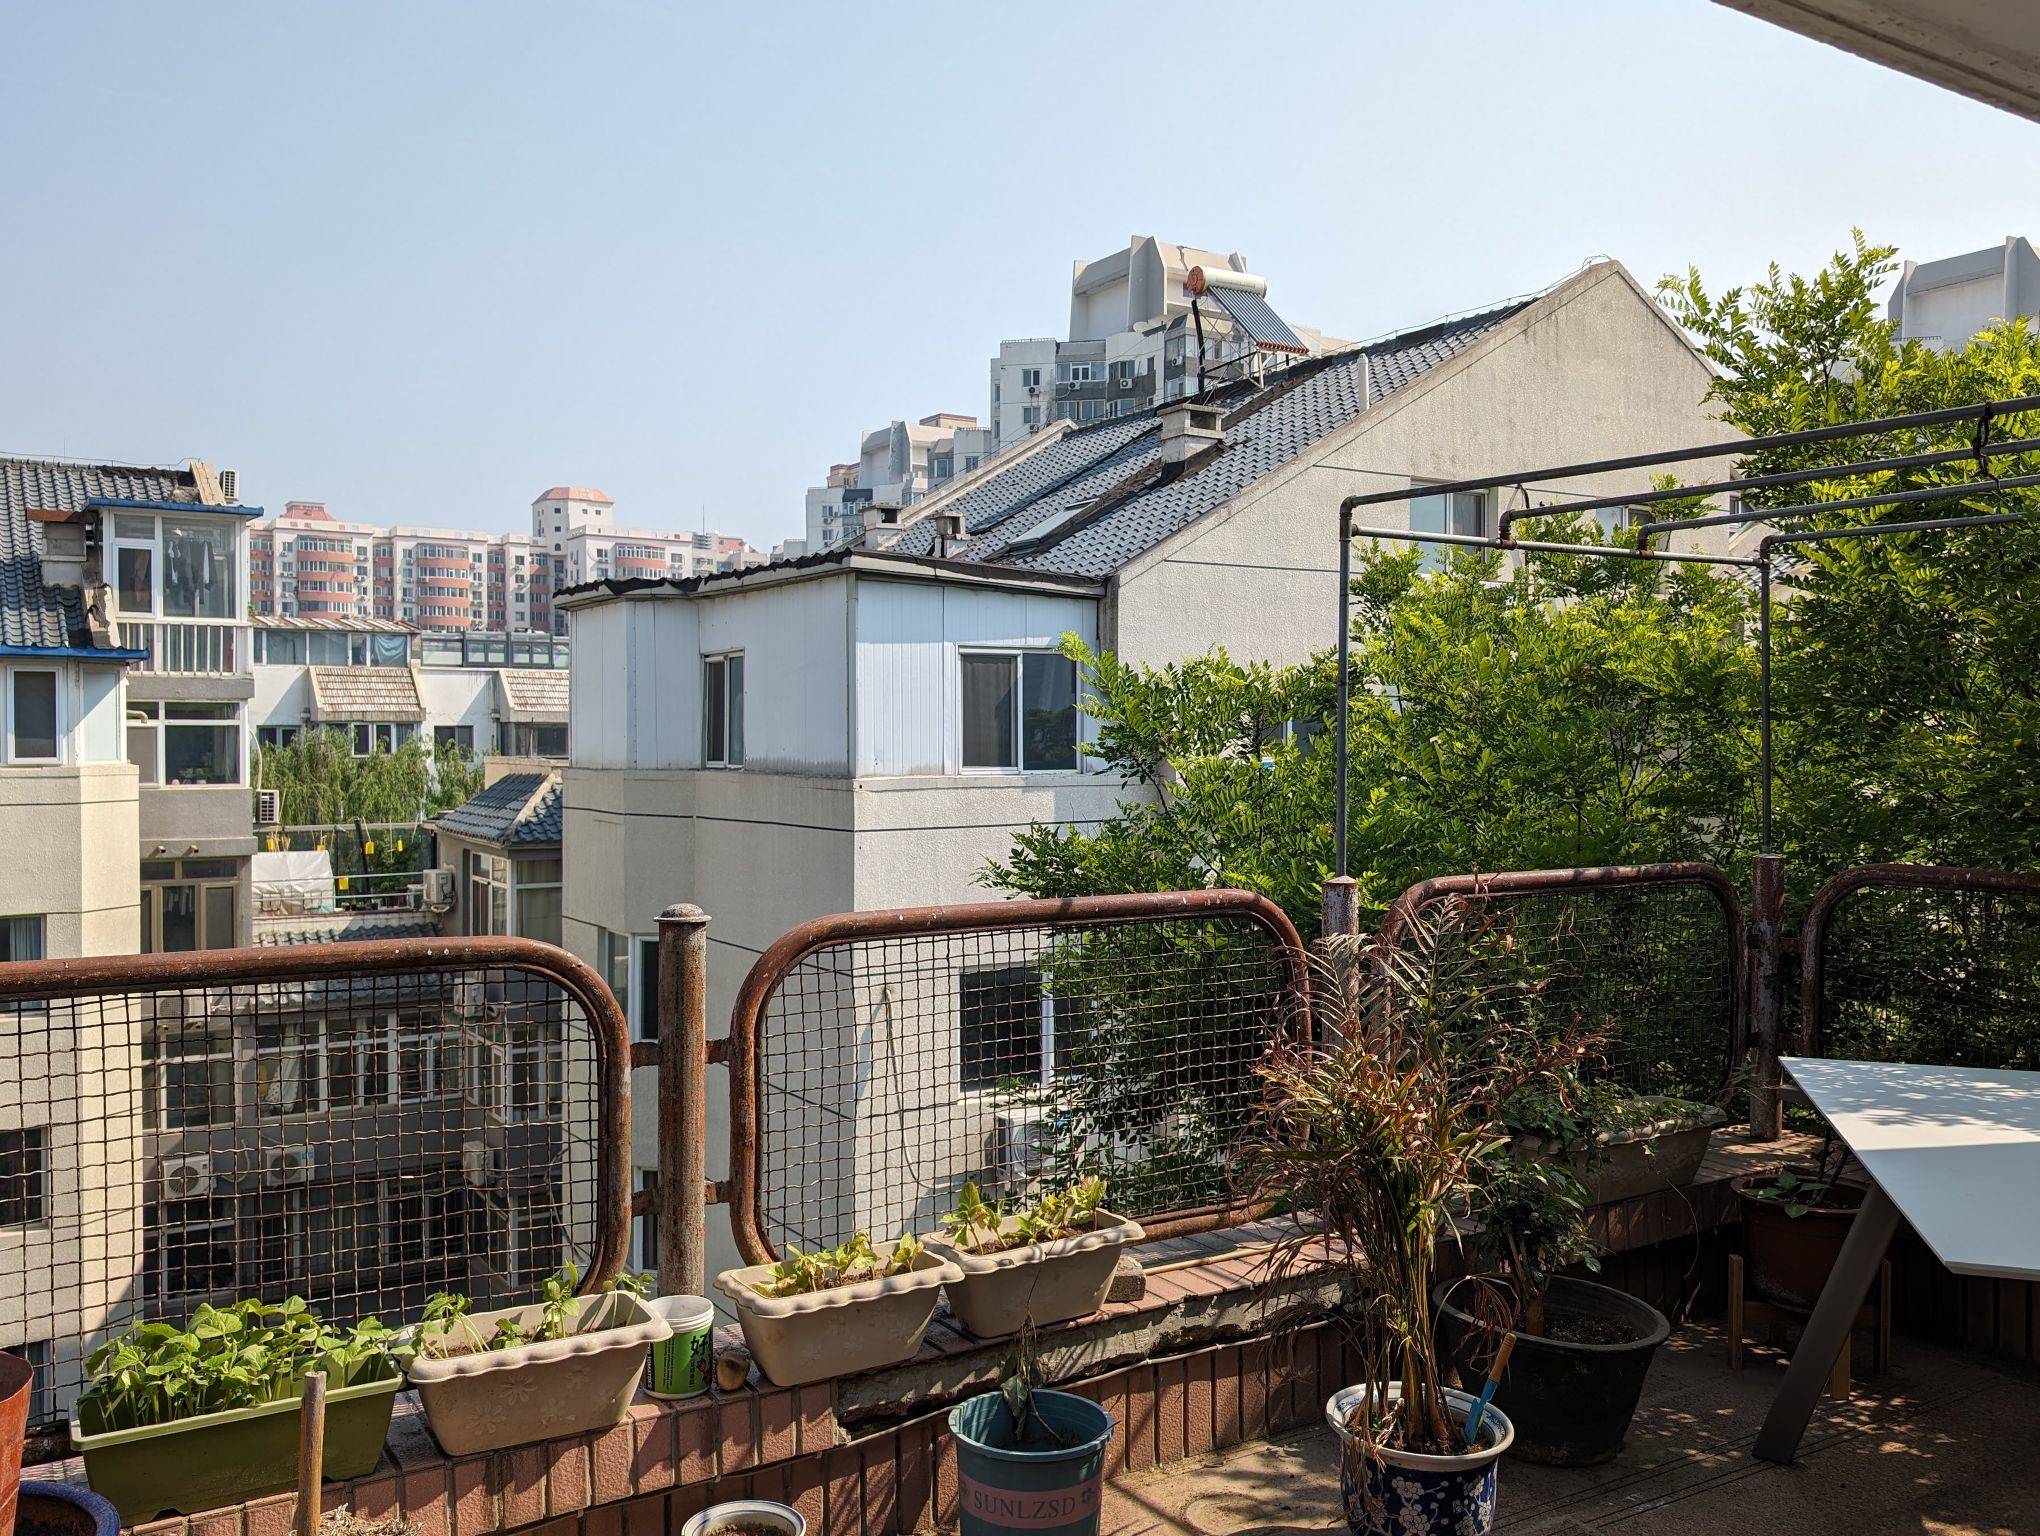 Beijing-Chaoyang-Cozy Home,Clean&Comfy,No Gender Limit,Hustle & Bustle,Chilled,LGBTQ Friendly,Pet Friendly